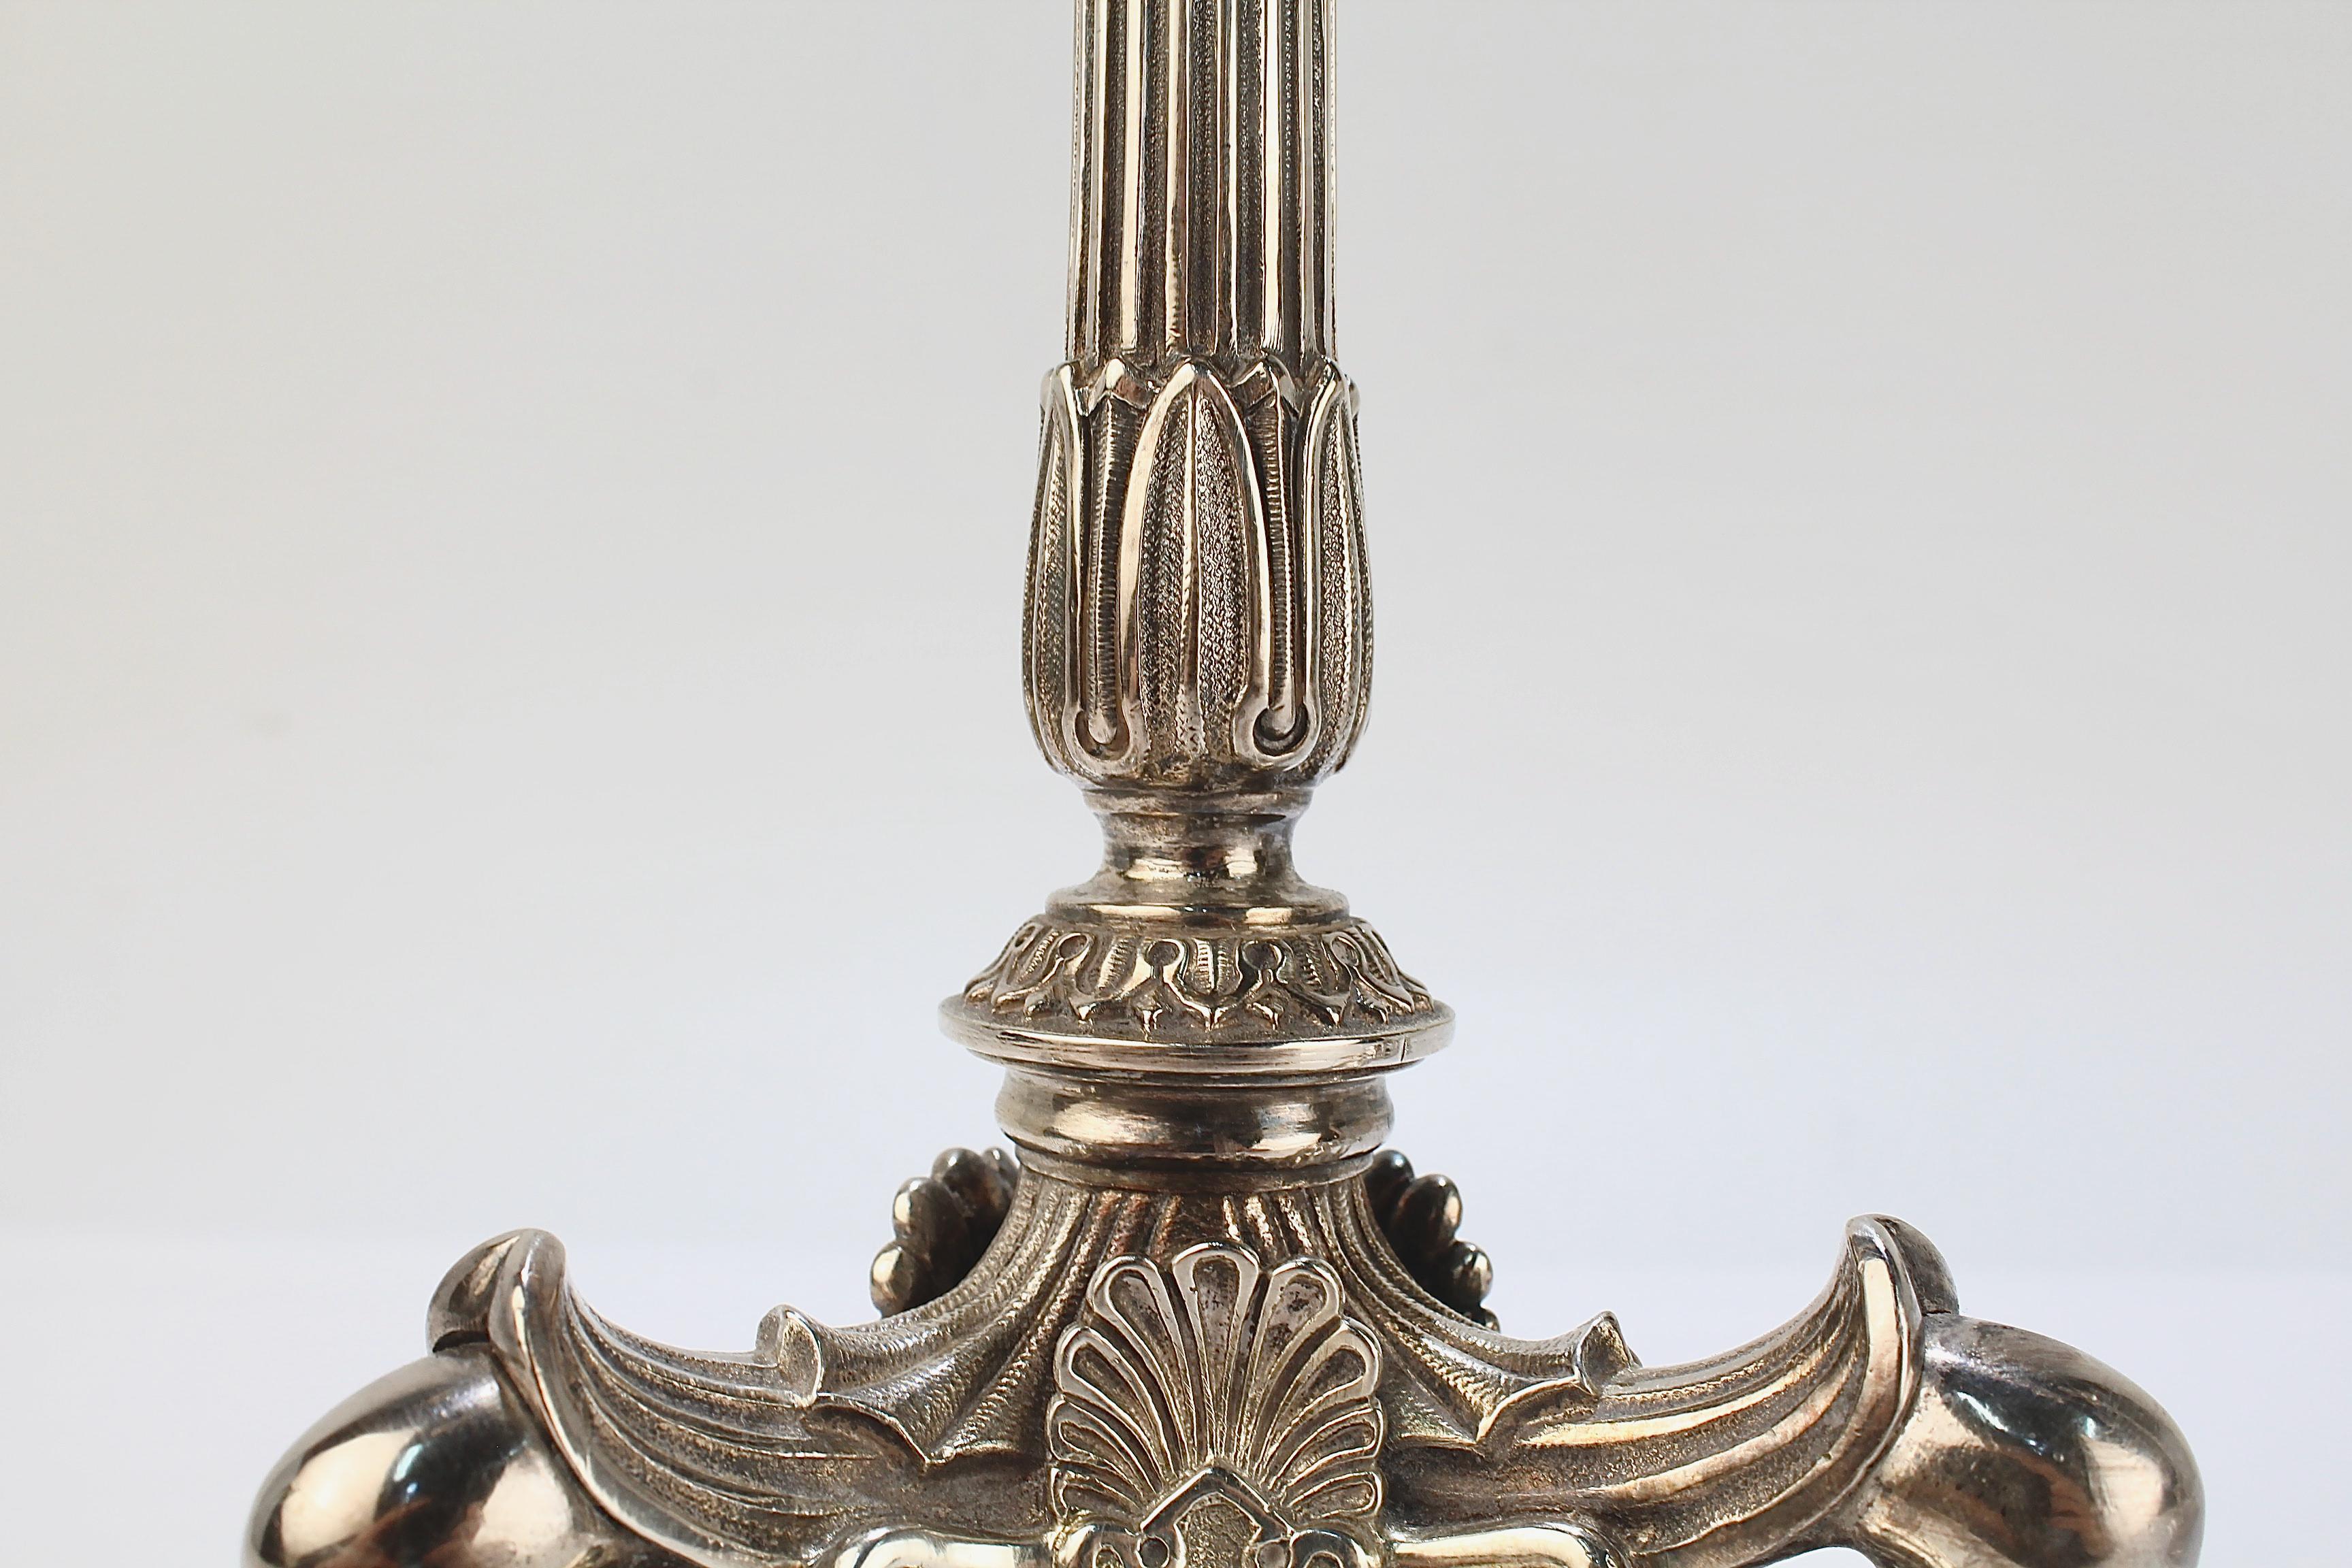 Pair of Elkington & Co Neoclassical Revival Silver Plated Five-Light Candelabra For Sale 3